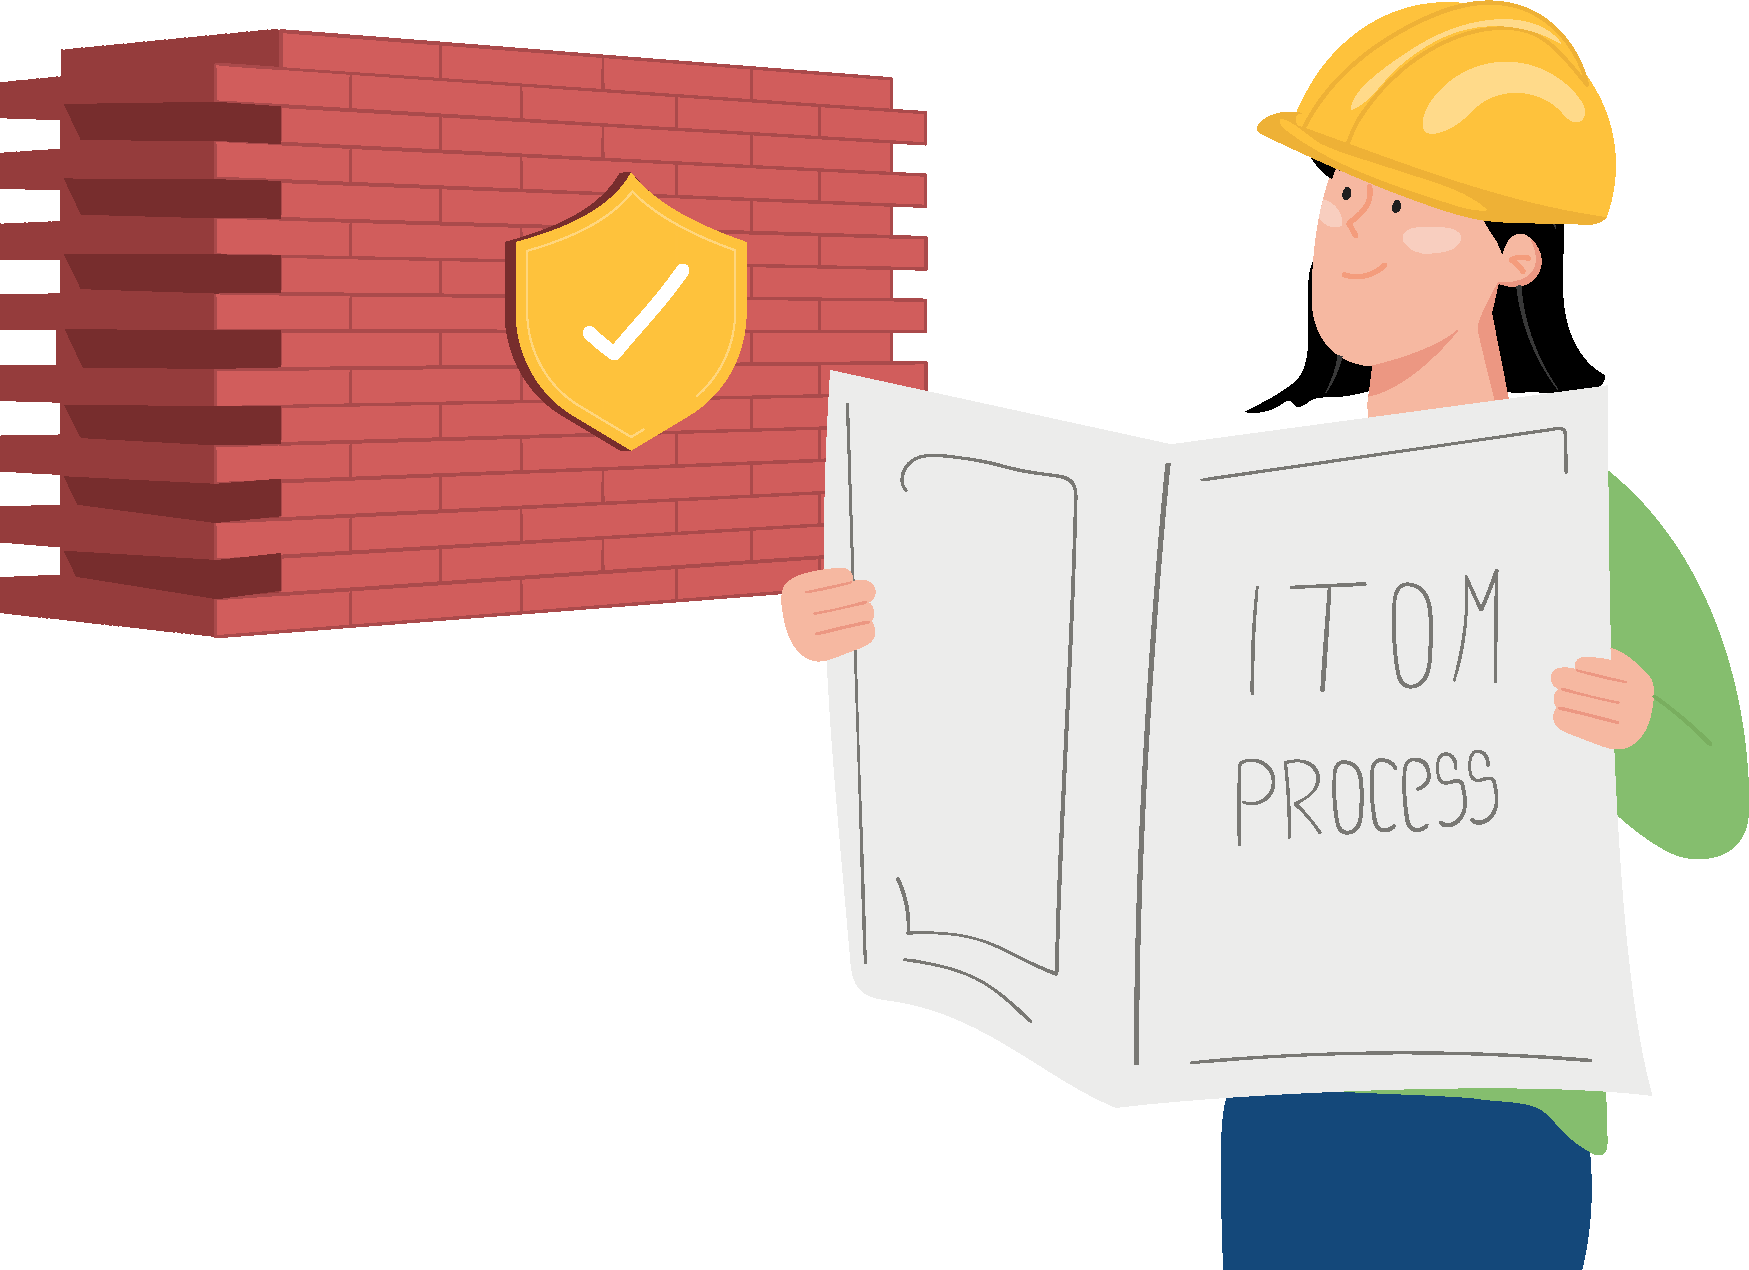 ITOM solutions with process checklist